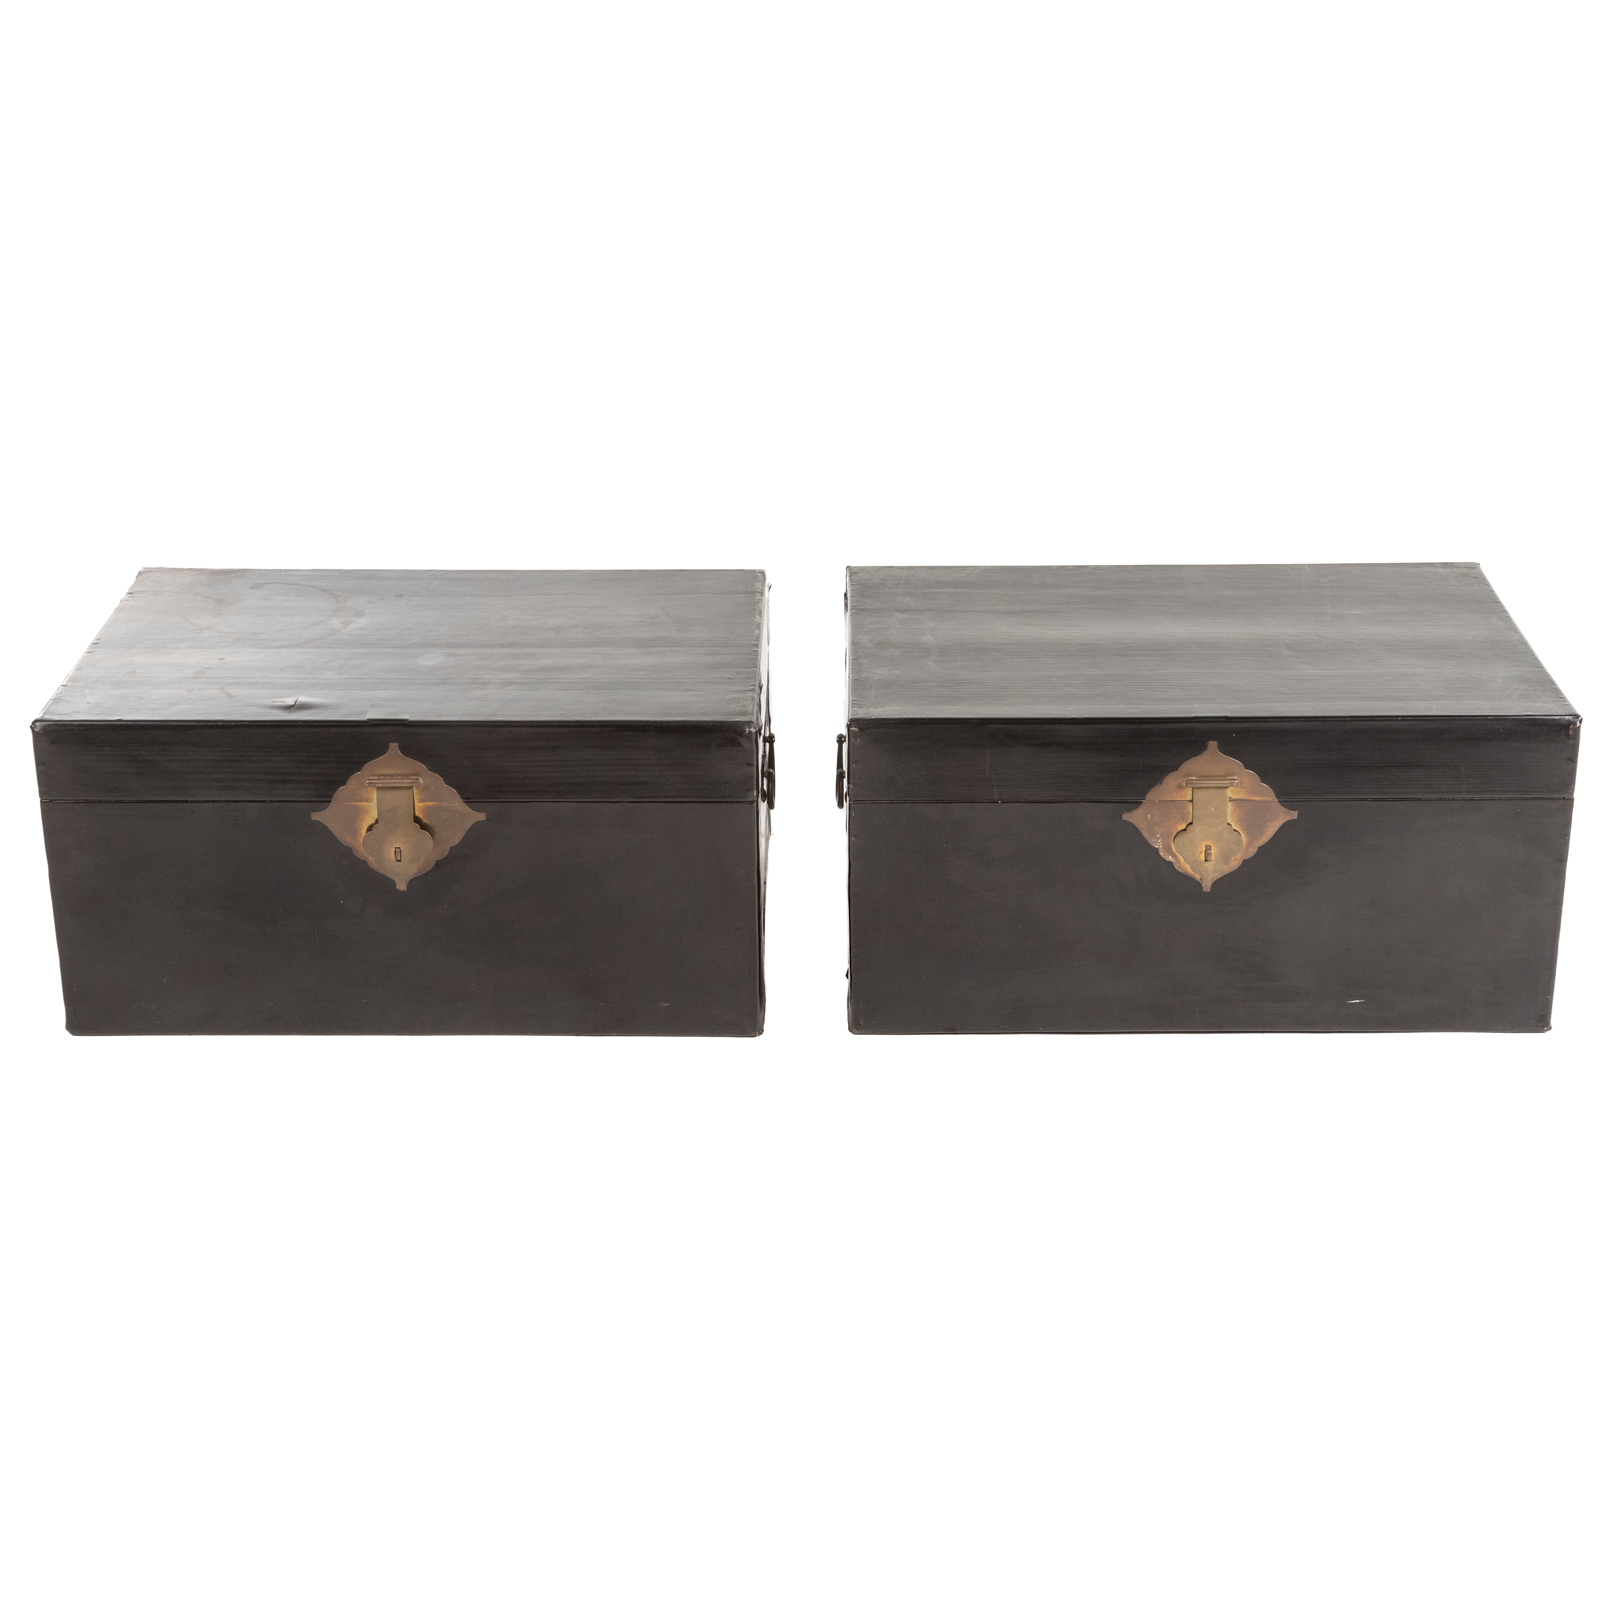 A PAIR OF ASIAN LACQUER TRUNKS 2eaea6